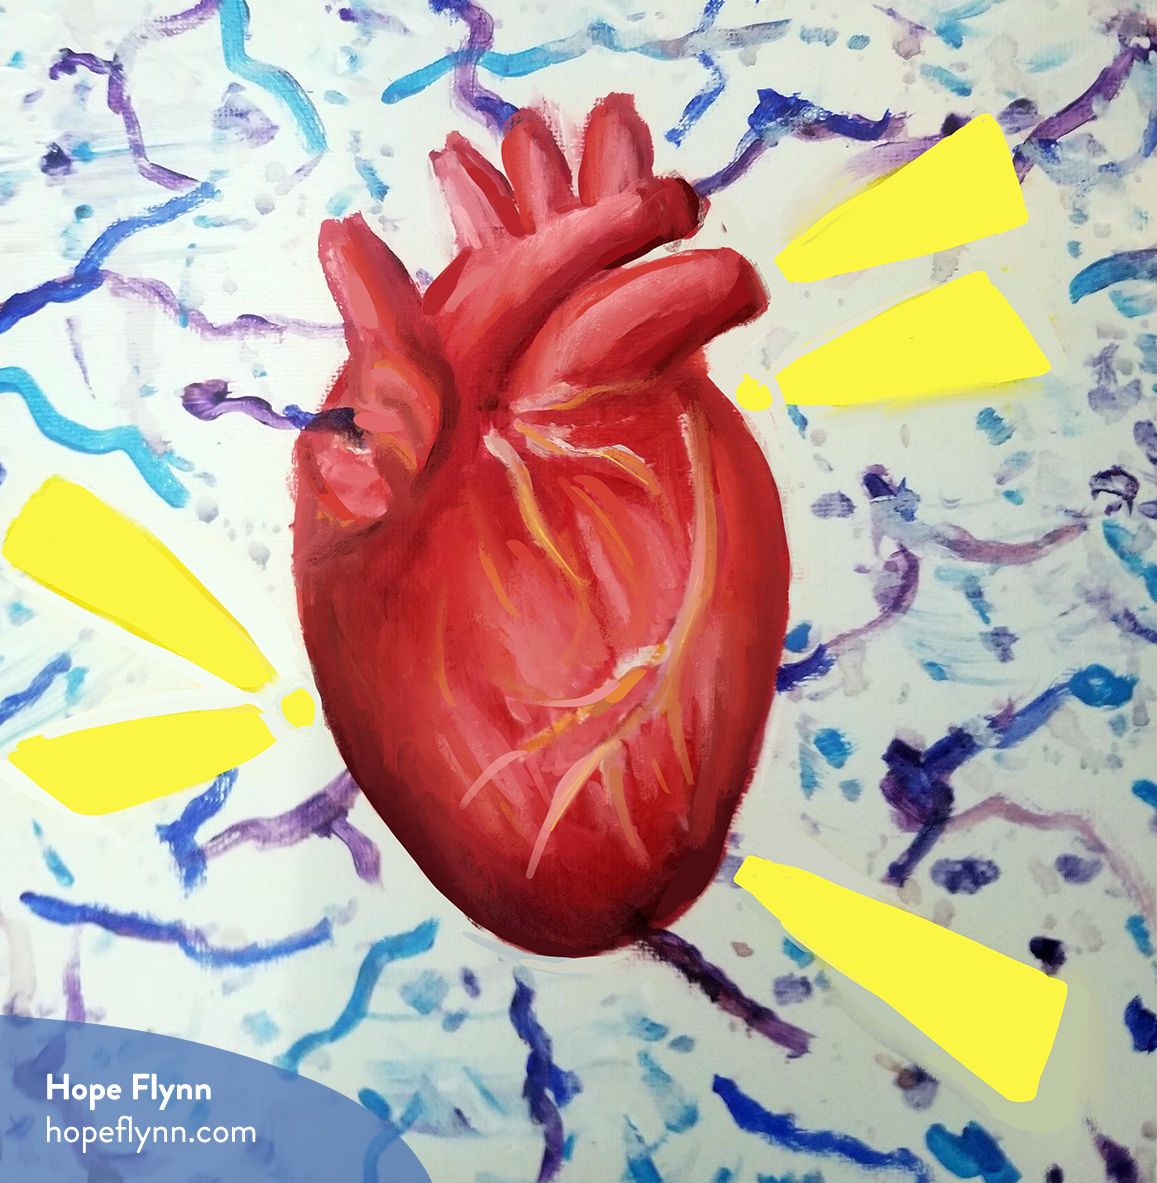 Square painting by Hope Flynn, featuring a realistic heart with abstract yellow and blue shapes painted around it. There is a watermark with Hope’s name and website (hopeflynn.com).